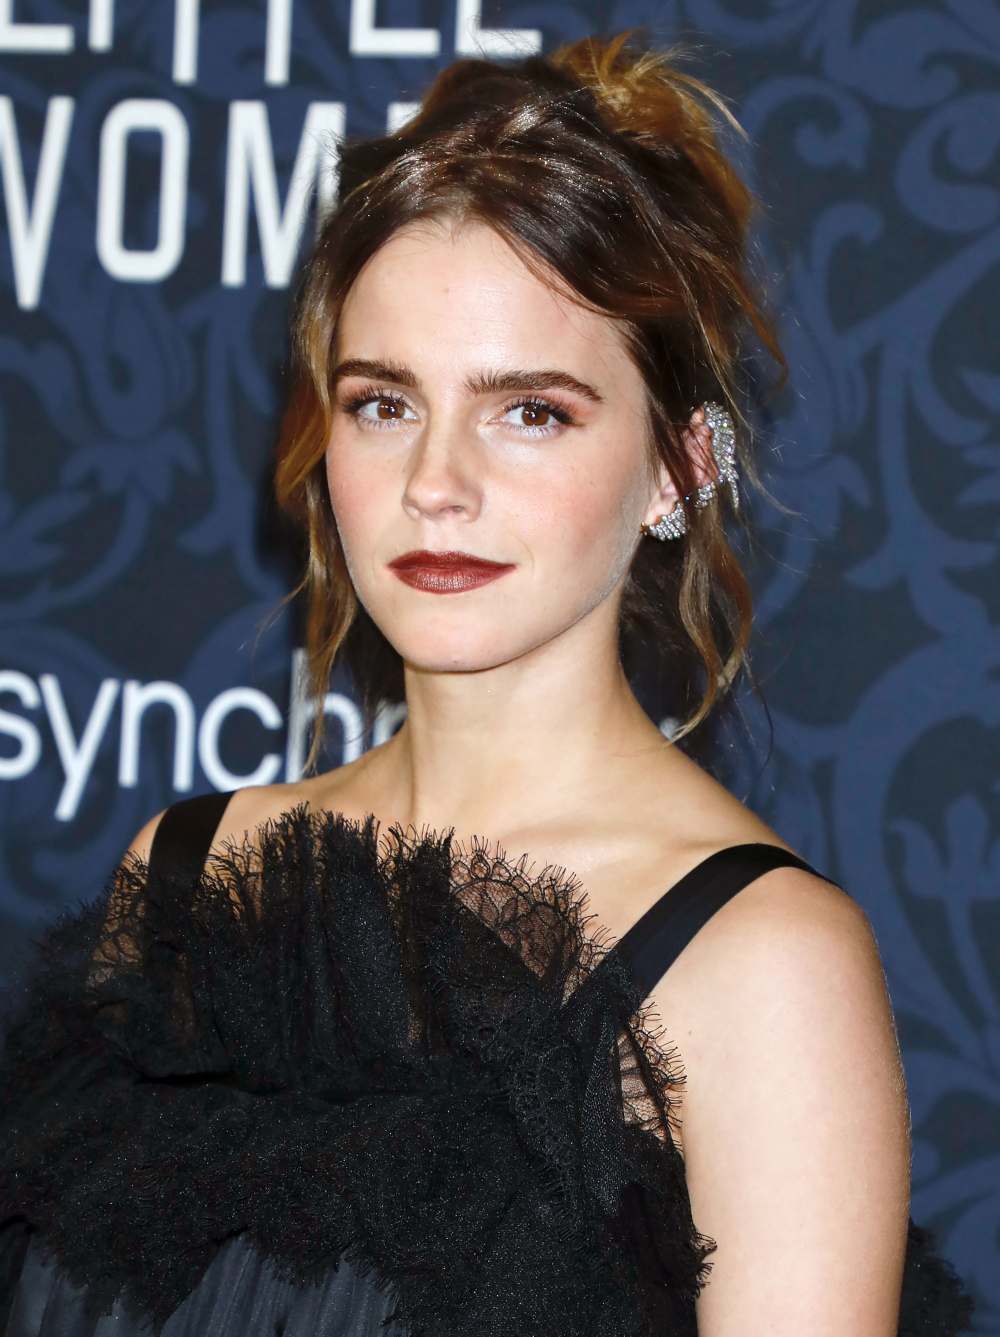 Emma Watson Responds After 'Blackout Tuesday' Backlash: 'I See Your Anger'